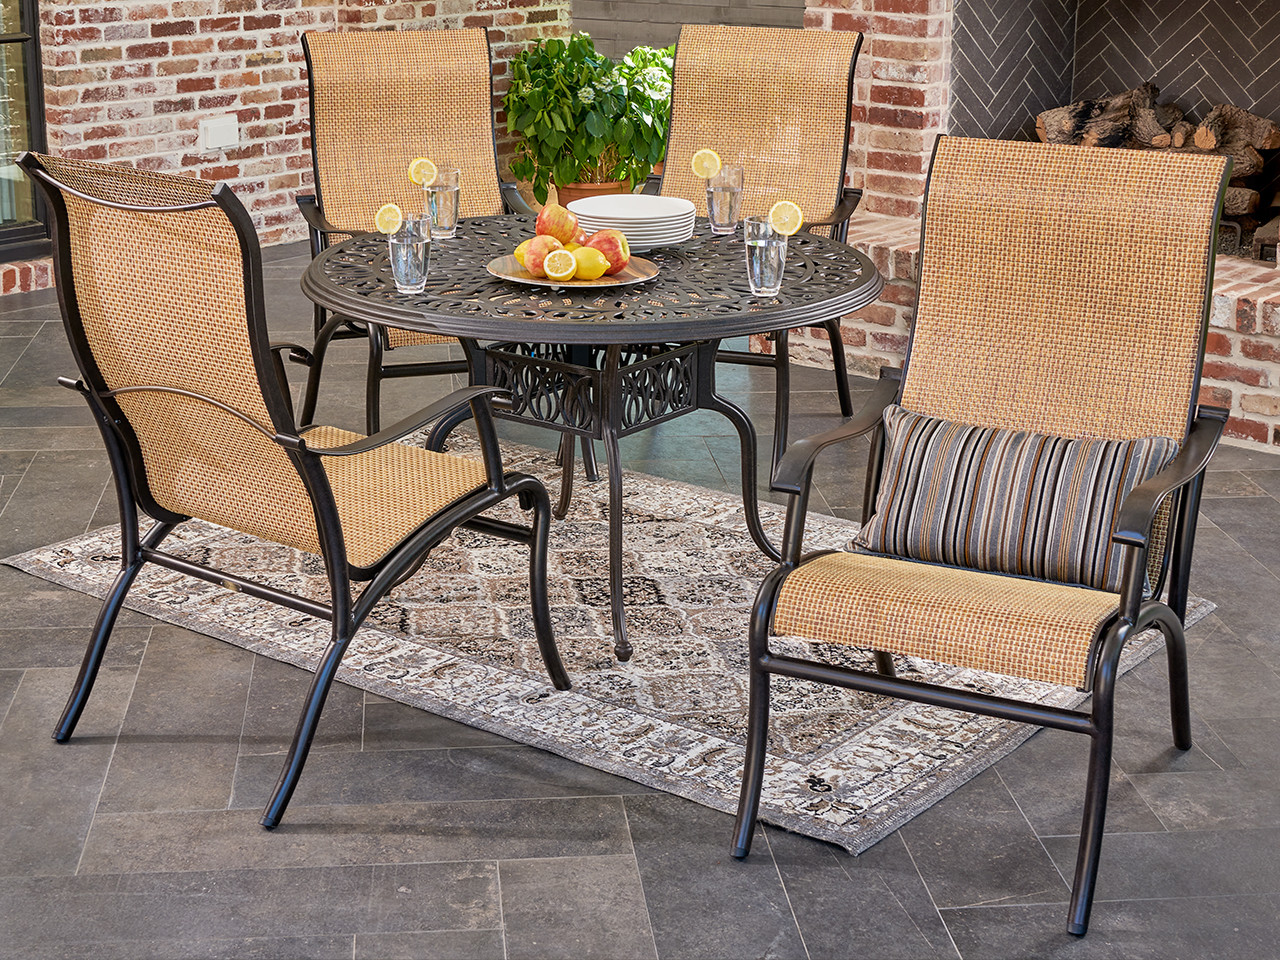 Scarsdale Autumn Rust Aluminum and Wicker Cordoba Sling 5 Pc. Dining Set with Ultra-high Back Arm Chairs and 48 in. D Table